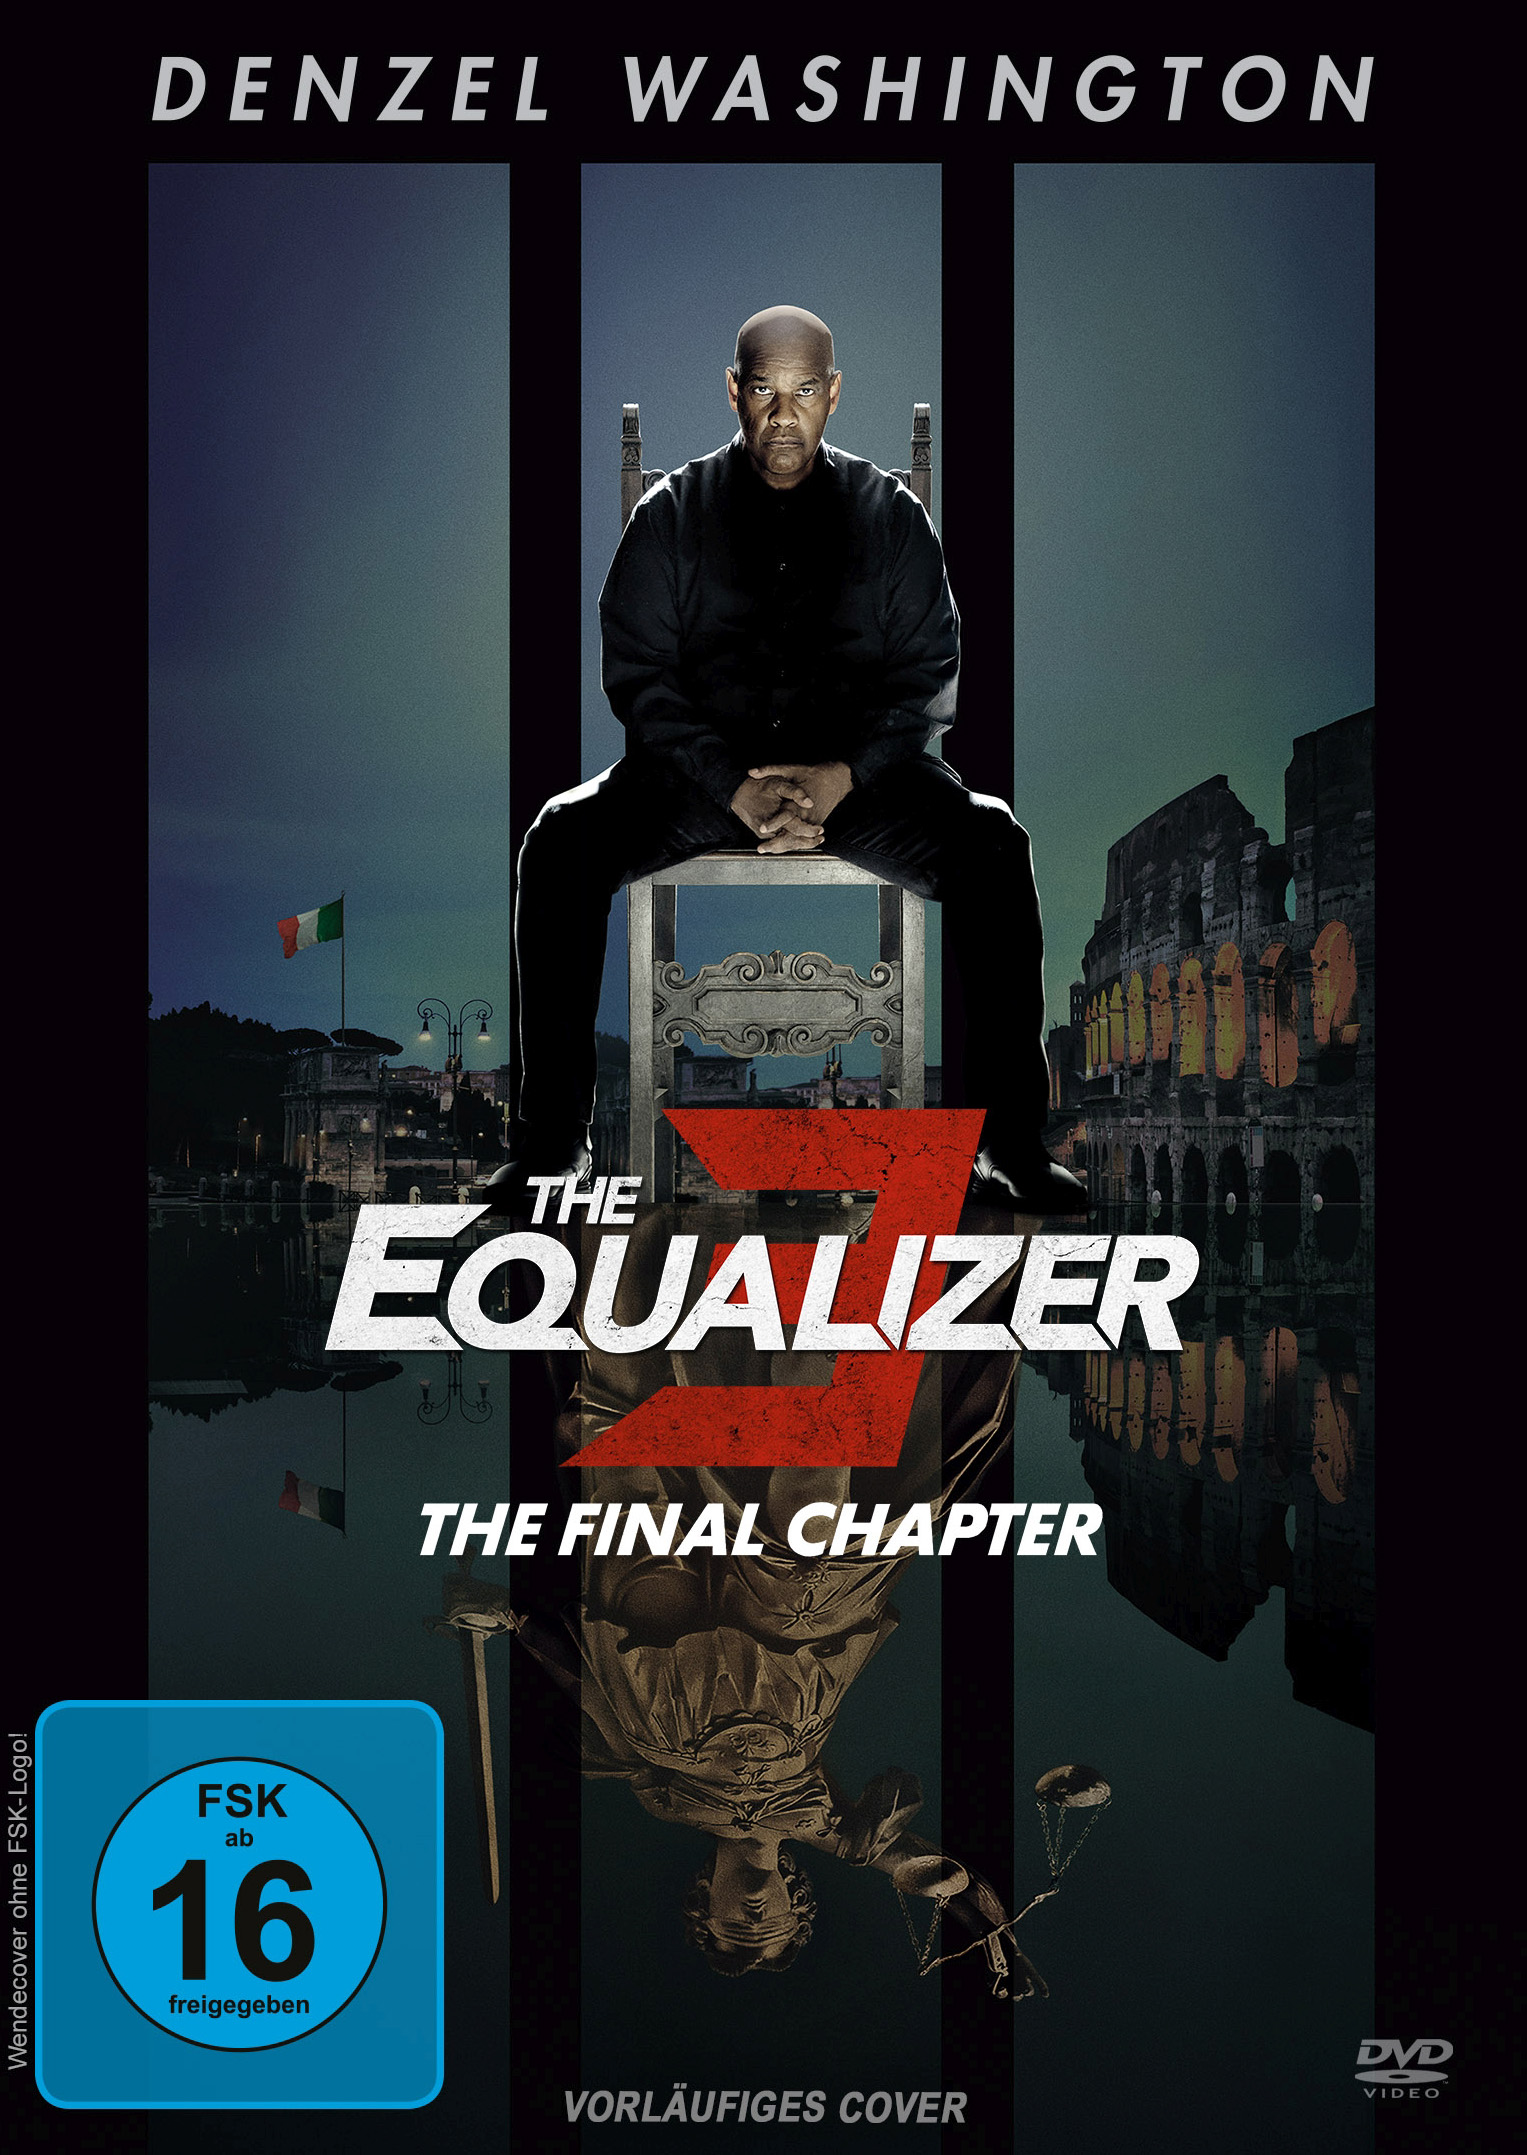 The Equalizer 3 - The Final Chapter (DVD)